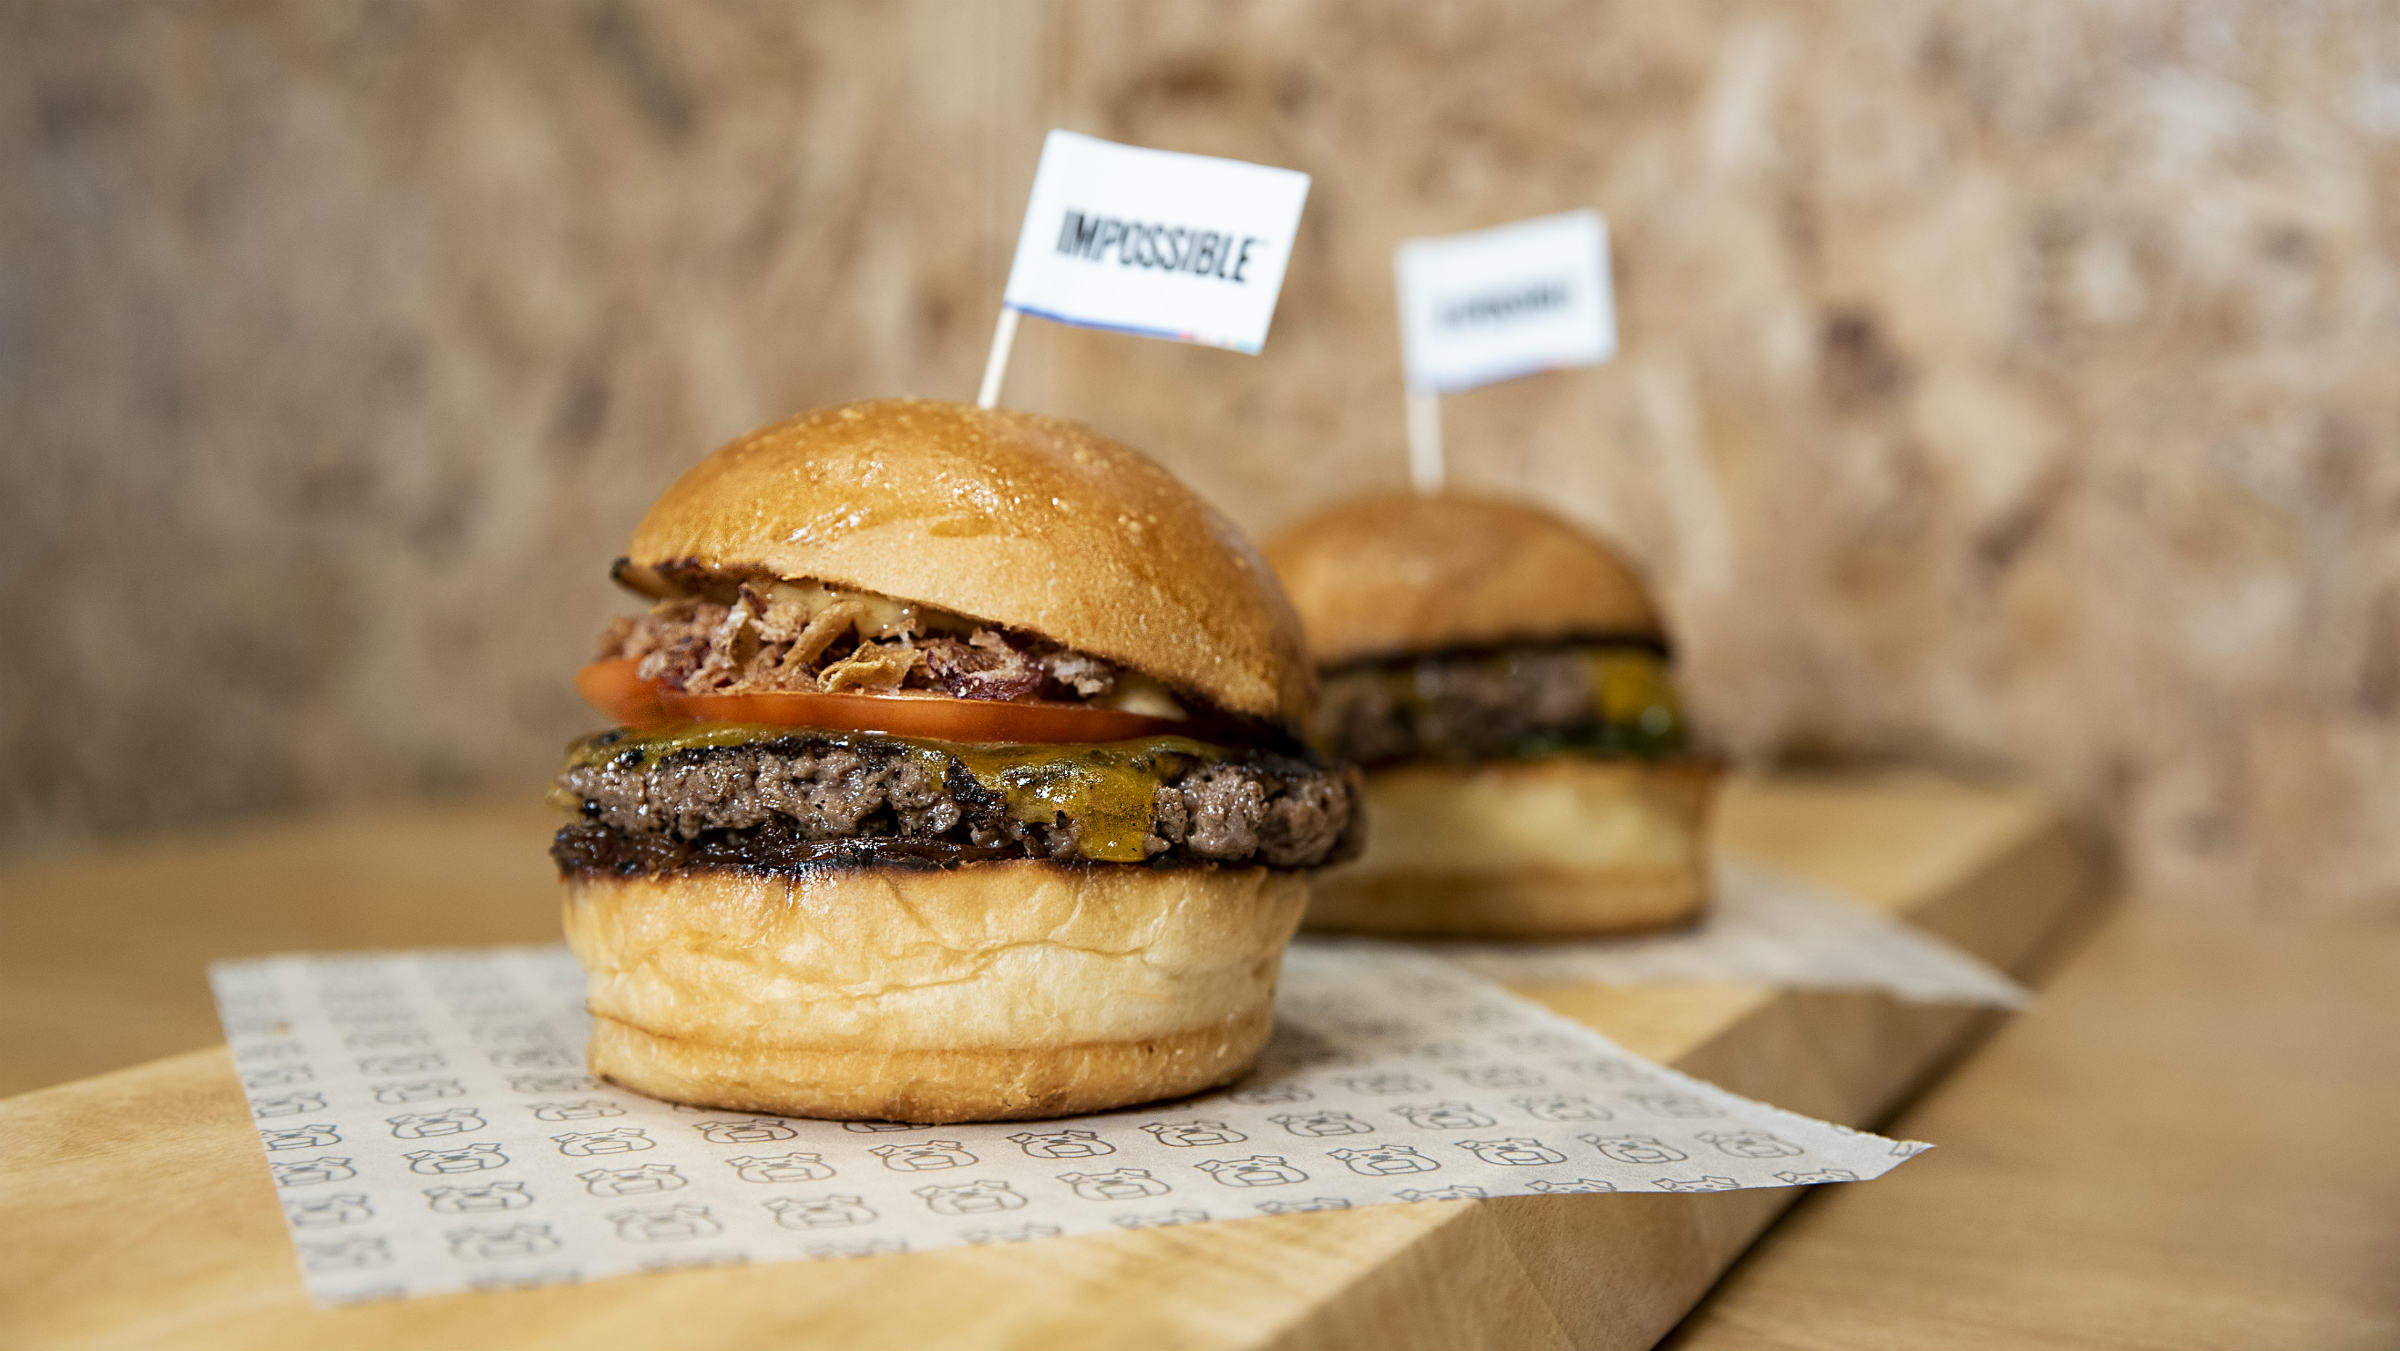 FILE PHOTO: A plant-based Impossible beef burger at the Impossible Foods headquarters in Silicon Valley, in San Francisco, California - REUTERS